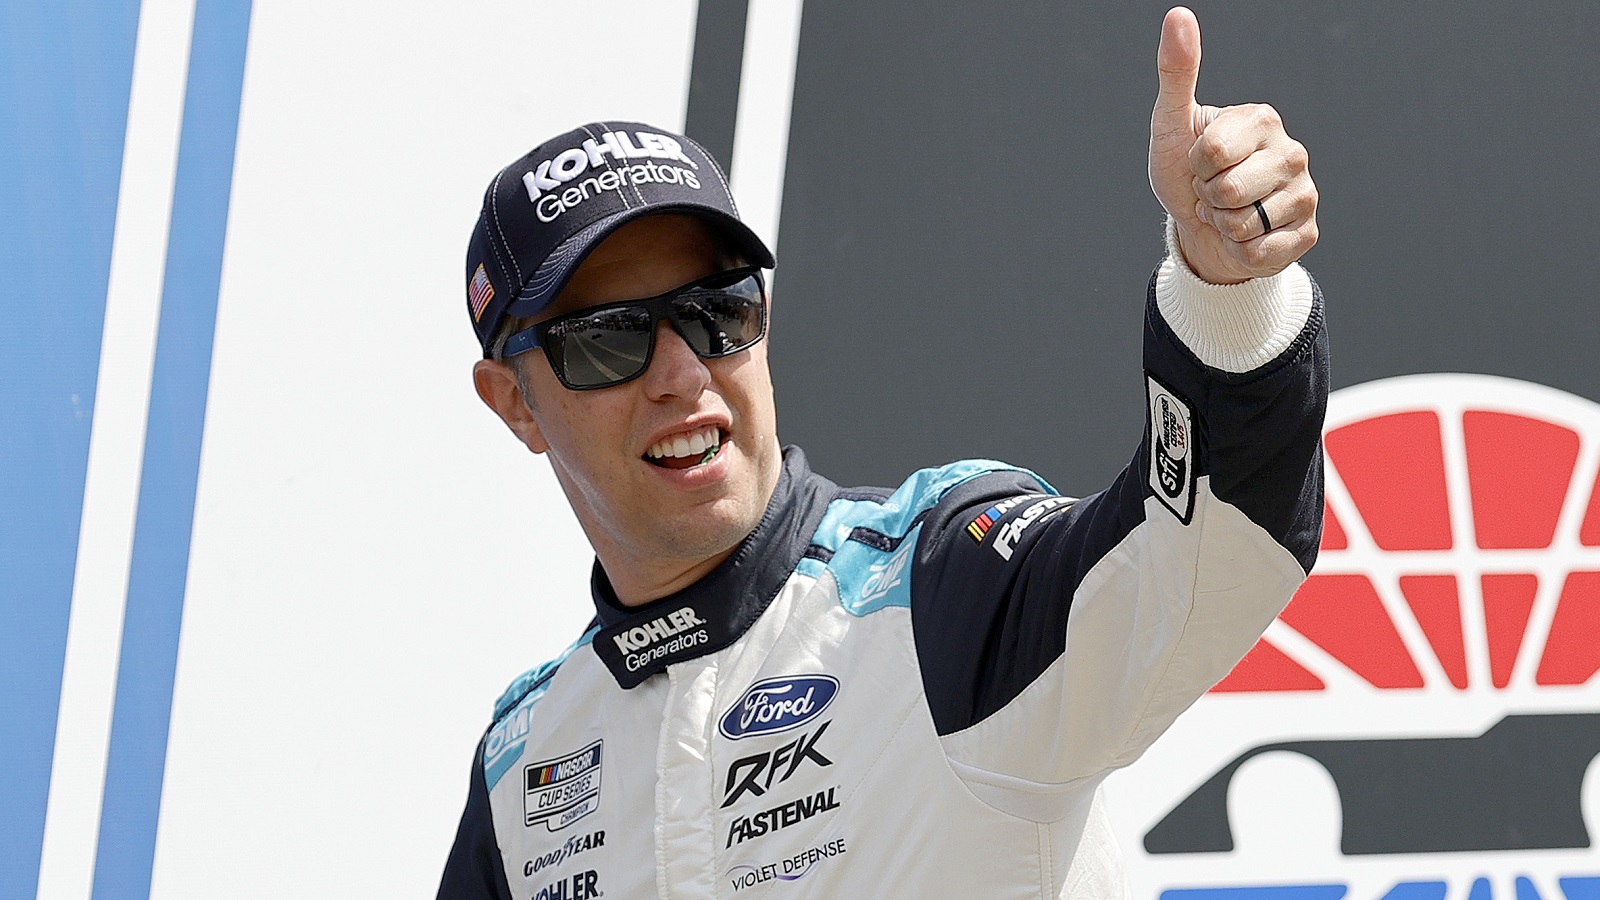 Brad Keselowski gives a thumbs up to fans during driver intros prior to the NASCAR Cup Series Ambetter 301 at New Hampshire Motor Speedway on July 17, 2022.